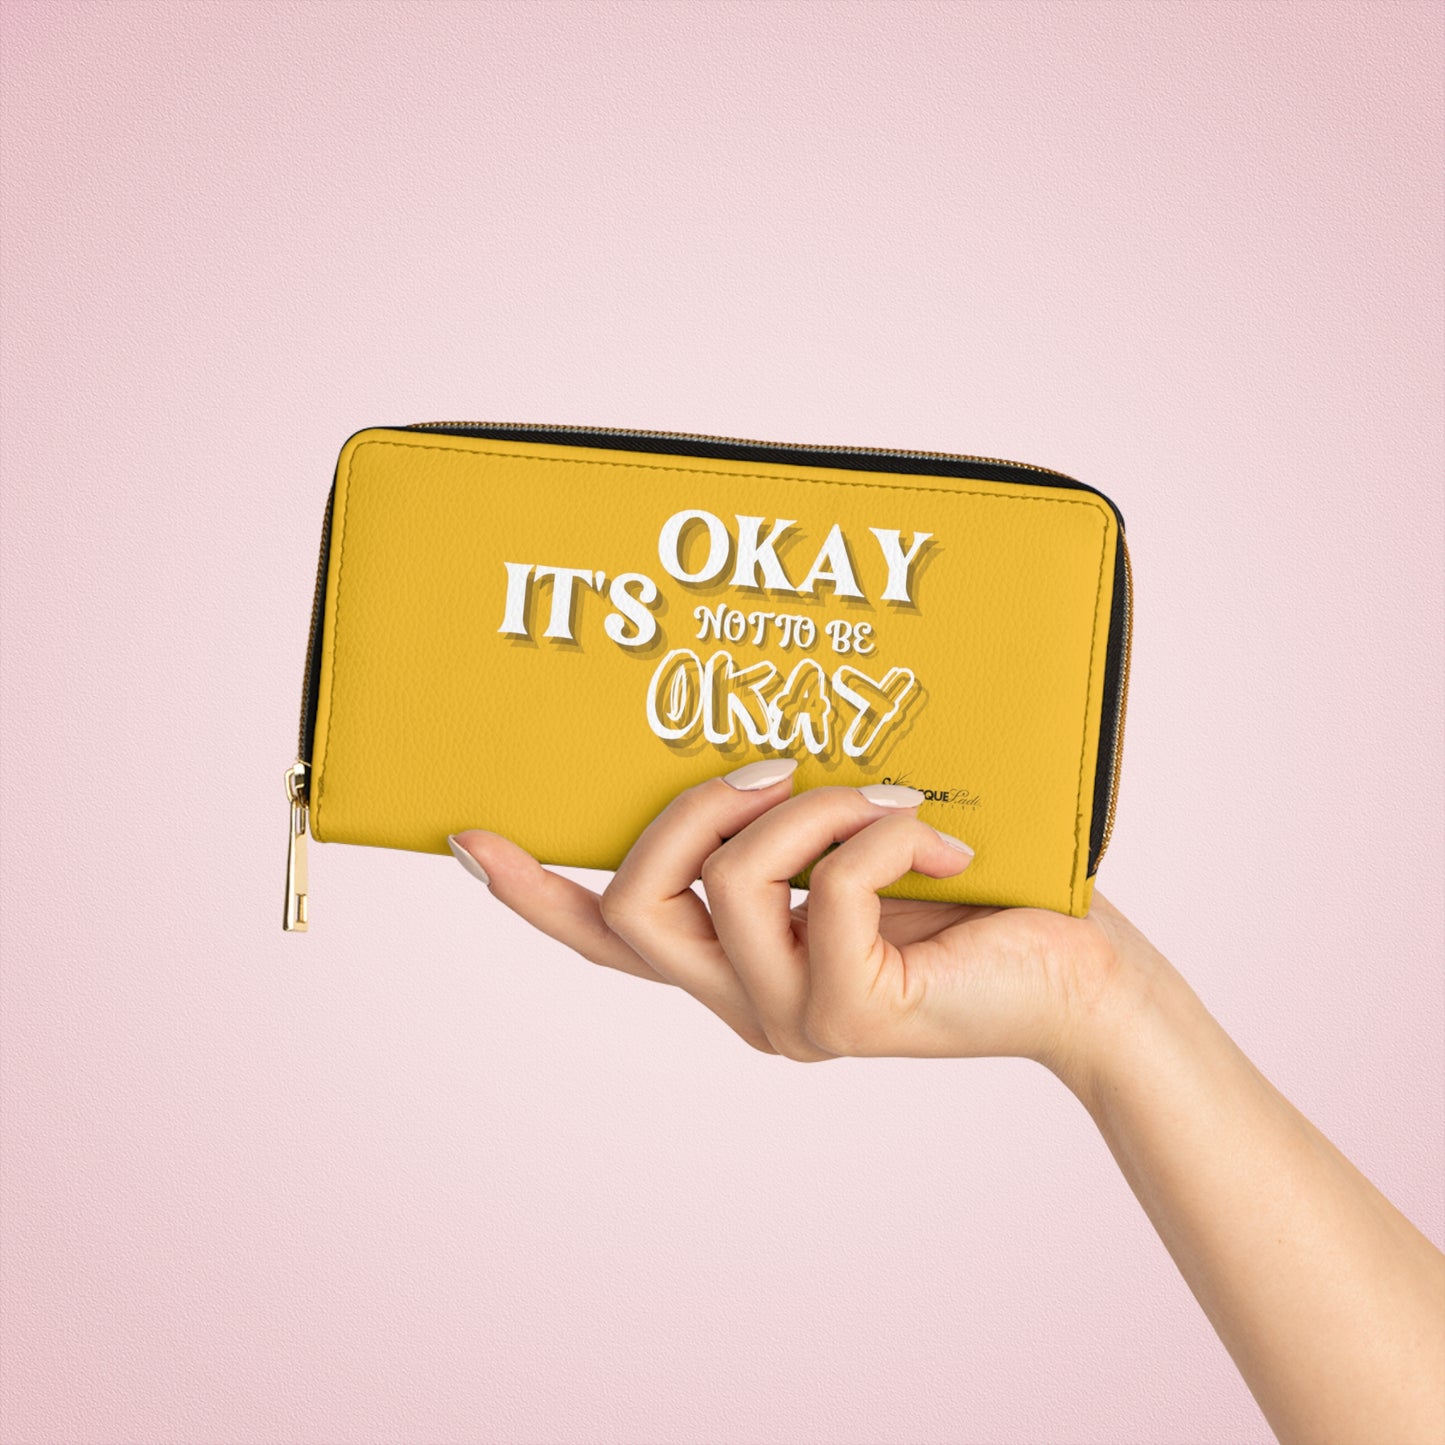 IT’S OKAY, NOT TO BE OKAY- Positive Afrocentric Affirmation Vegan Leather Wallet Bag- Empower Your Style and Self-Love; Yellow Wallet